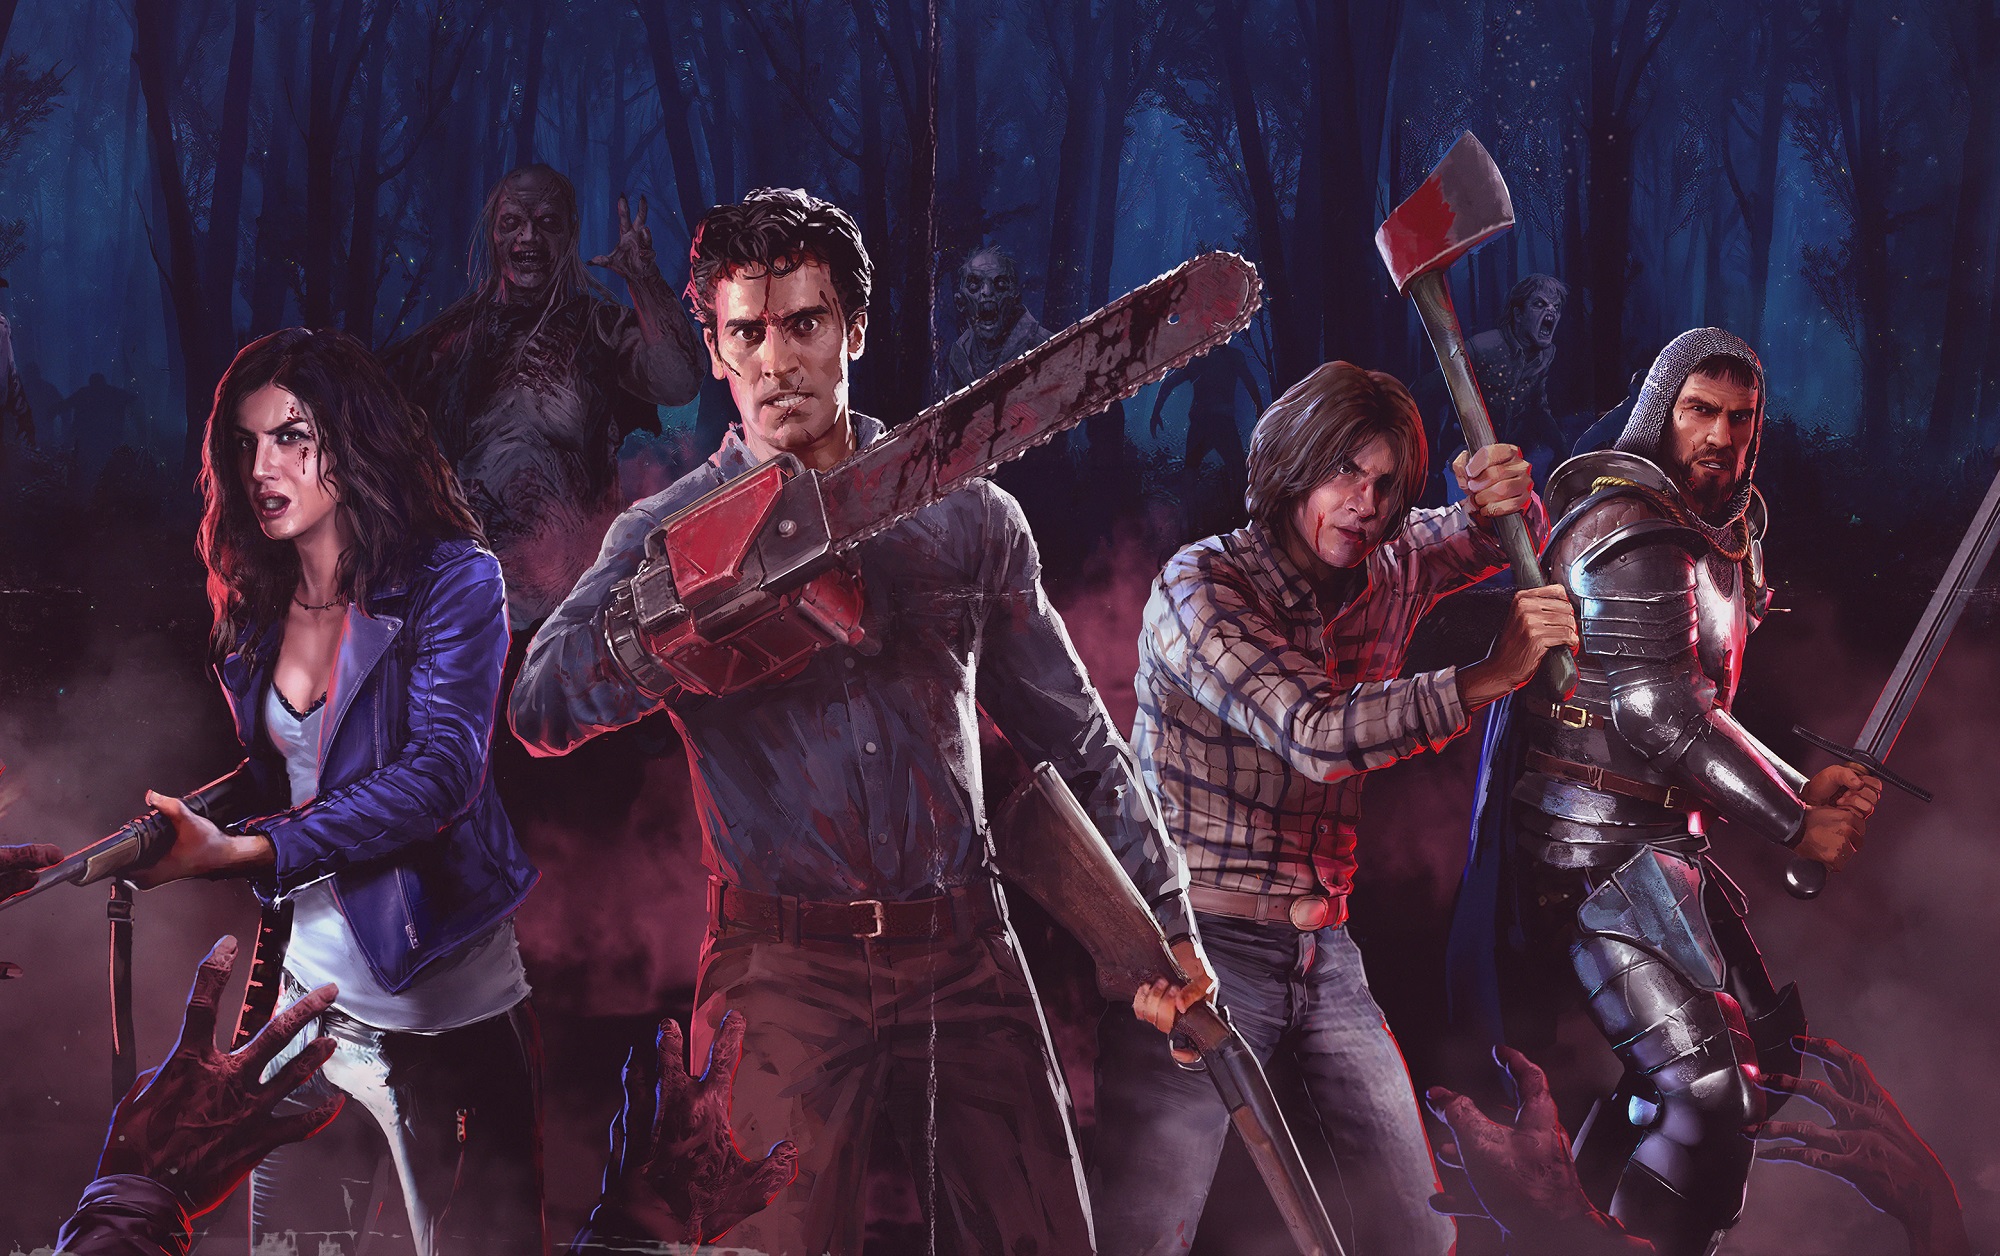 Evil Dead: The Game (2022) Review — Podcasting After Dark